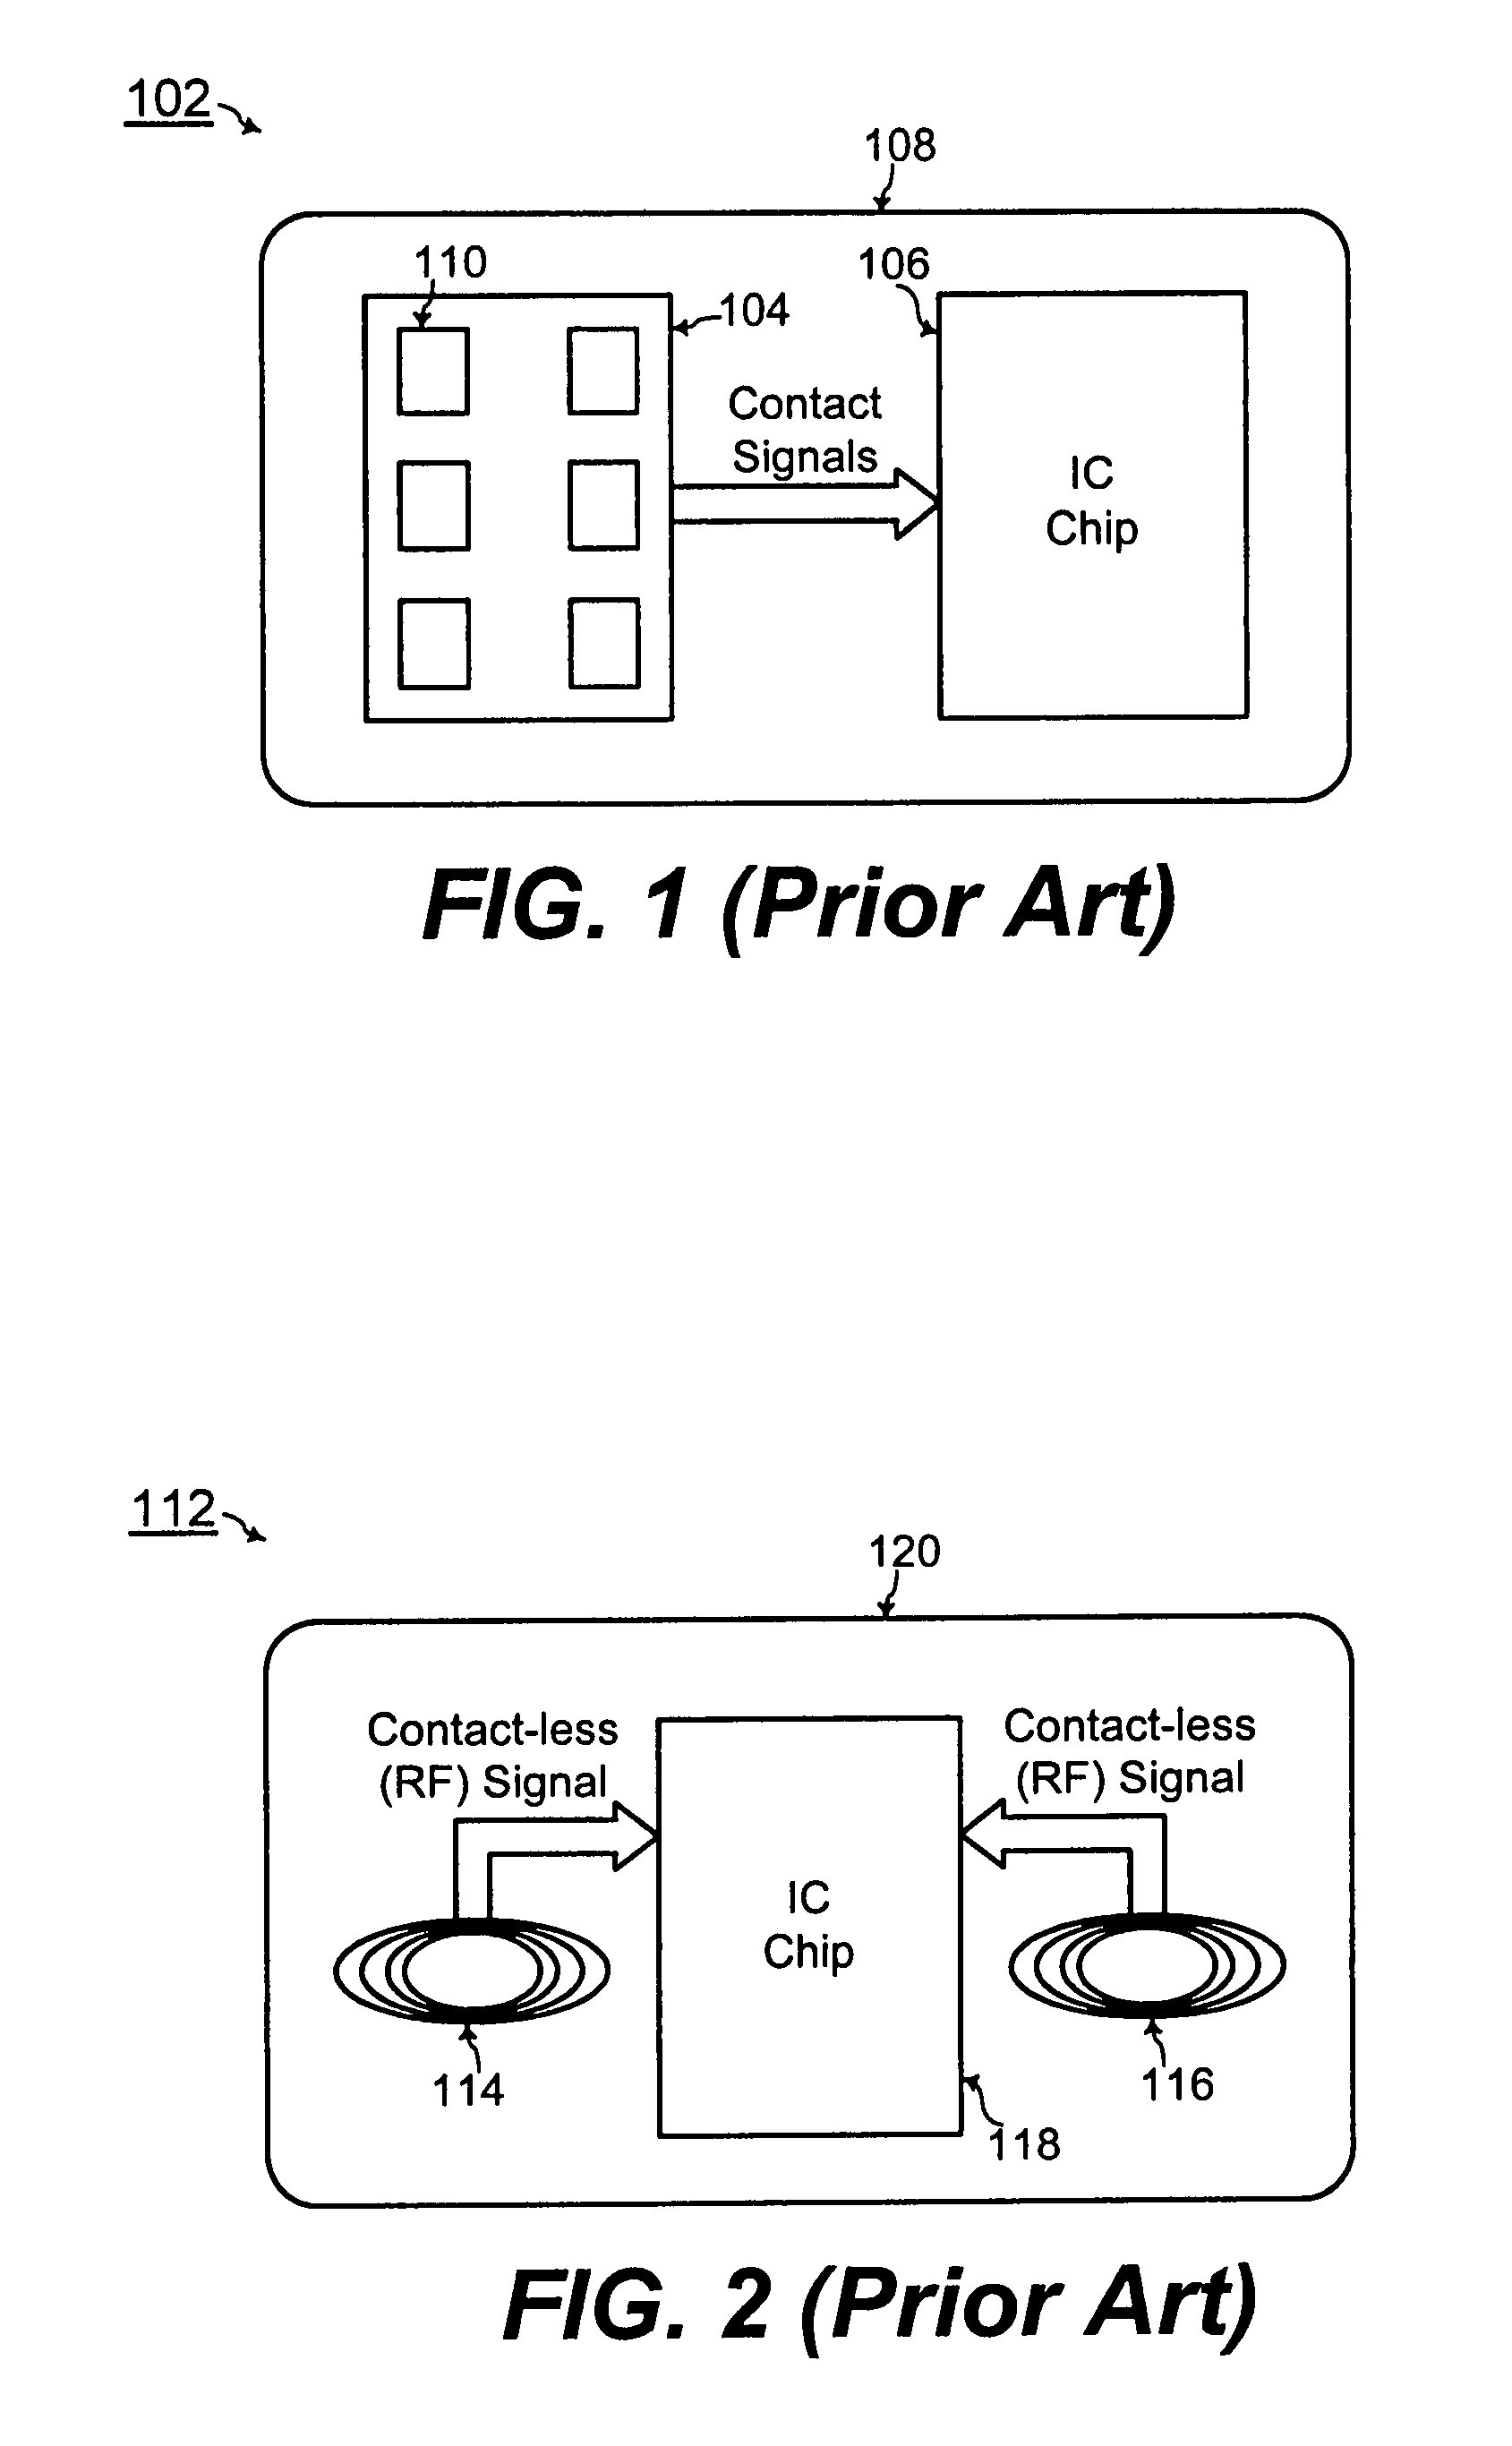 Chip card with simultaneous contact and contact-less operations